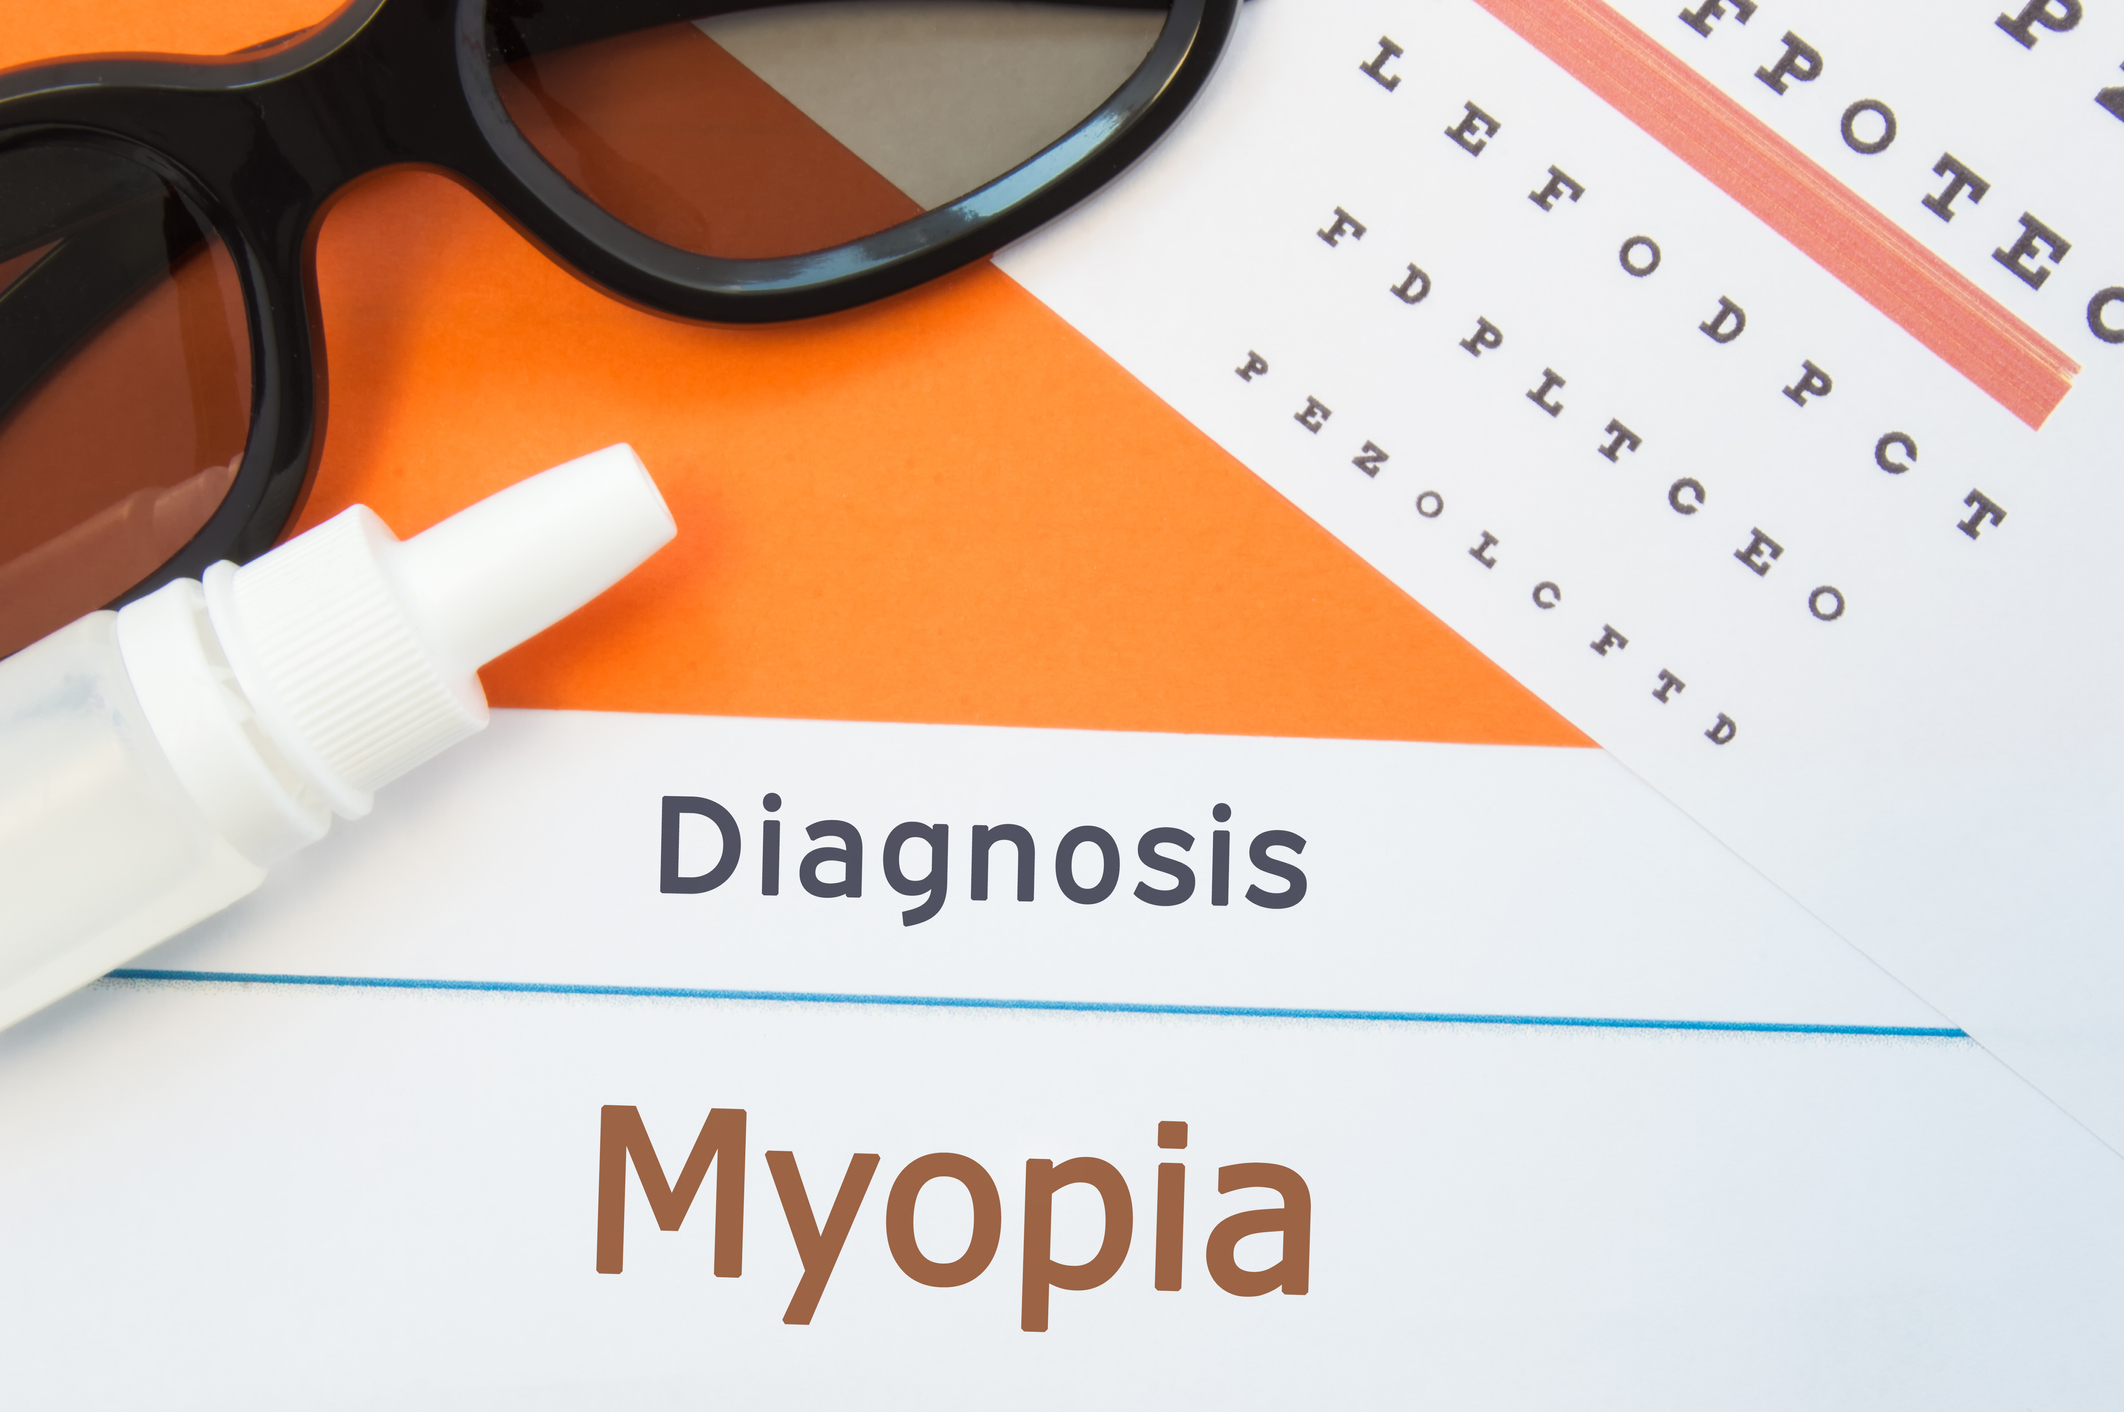 a document of a diagnosis of Myopia